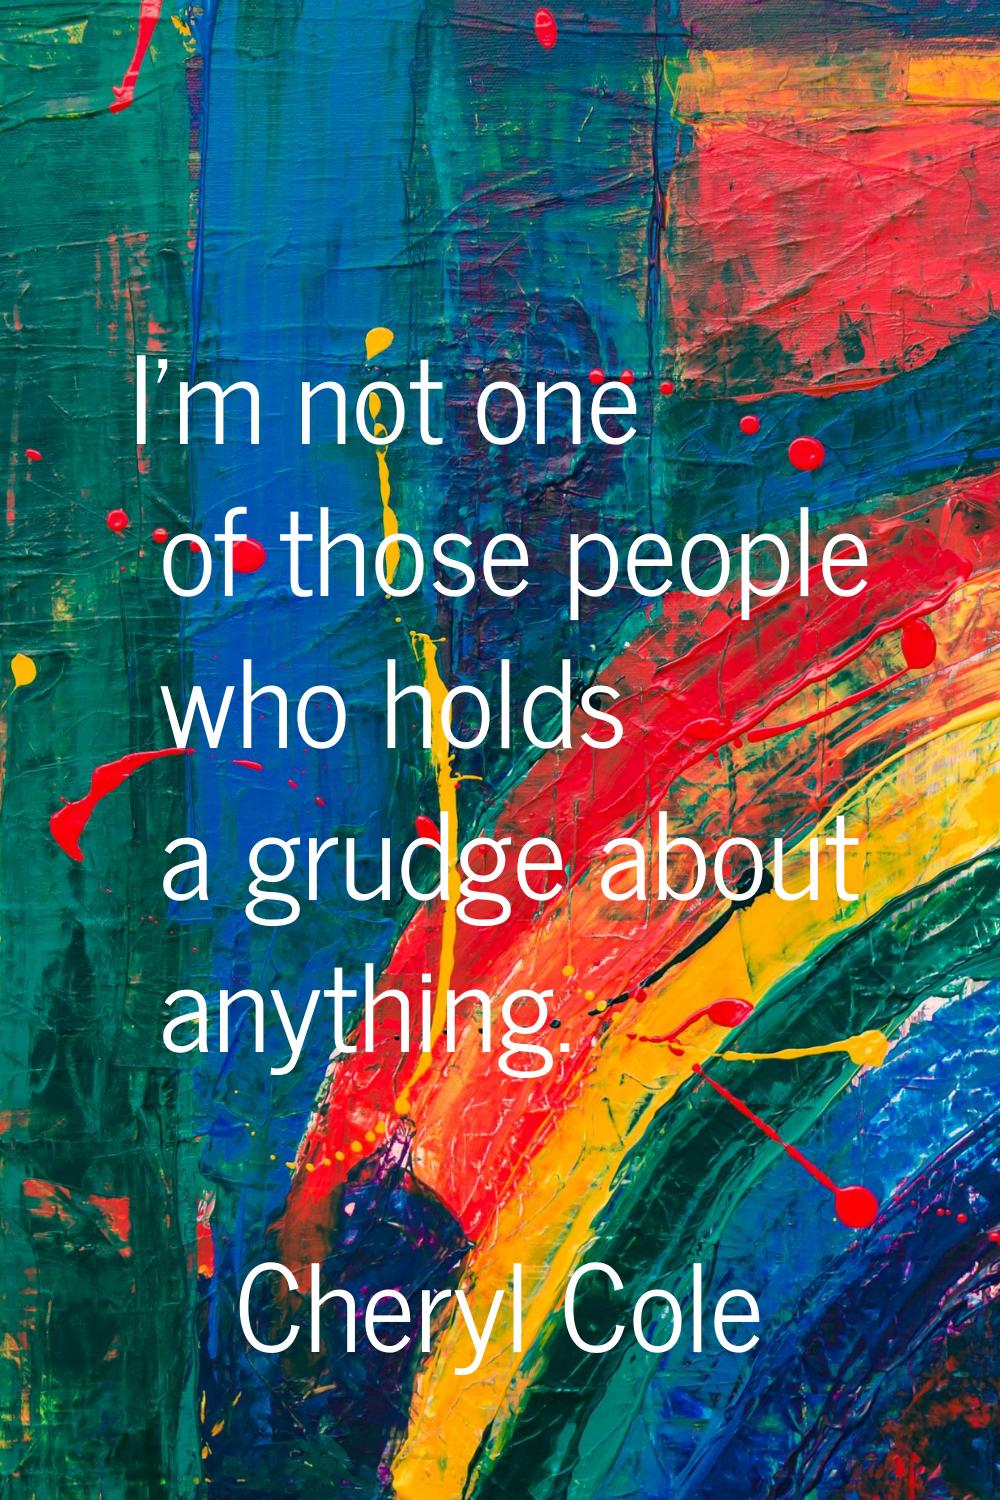 I'm not one of those people who holds a grudge about anything.